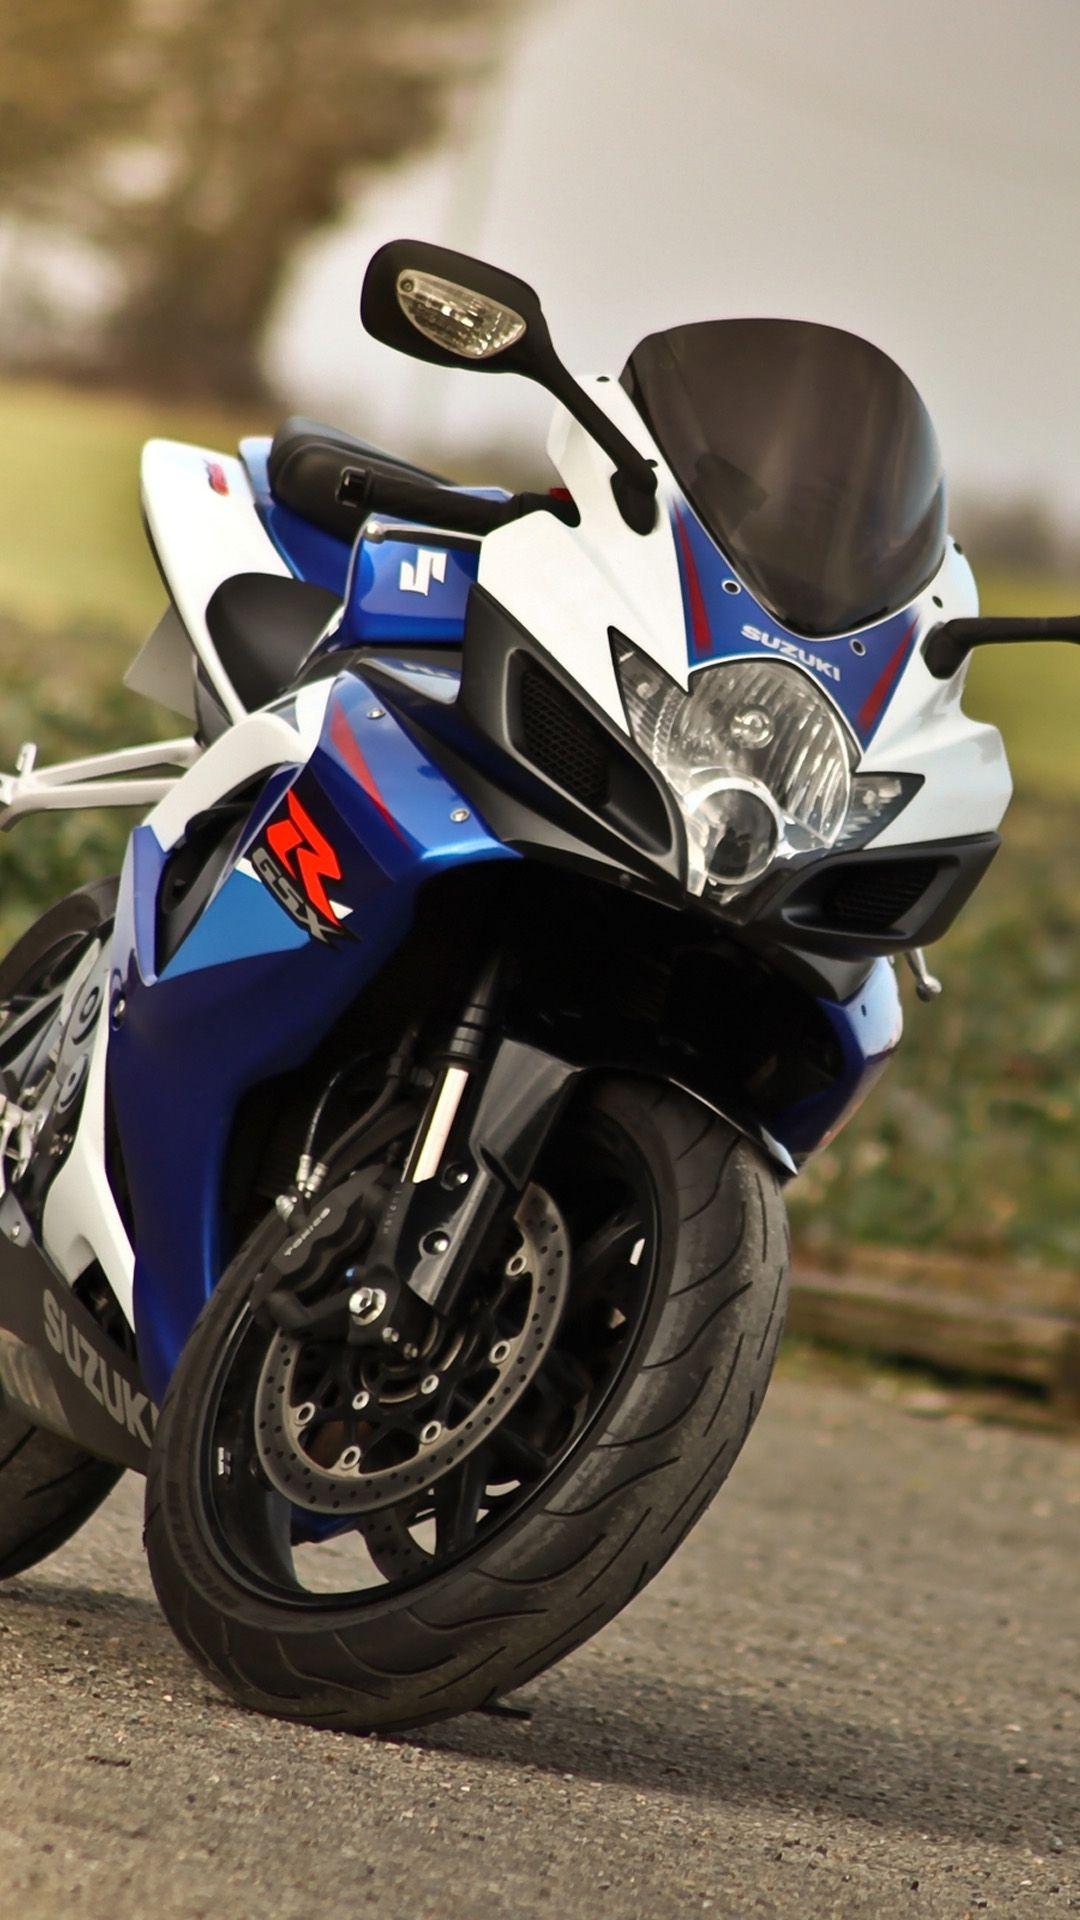 Suzuki Motorcycle Android wallpaper .androidhdwallpaper.com